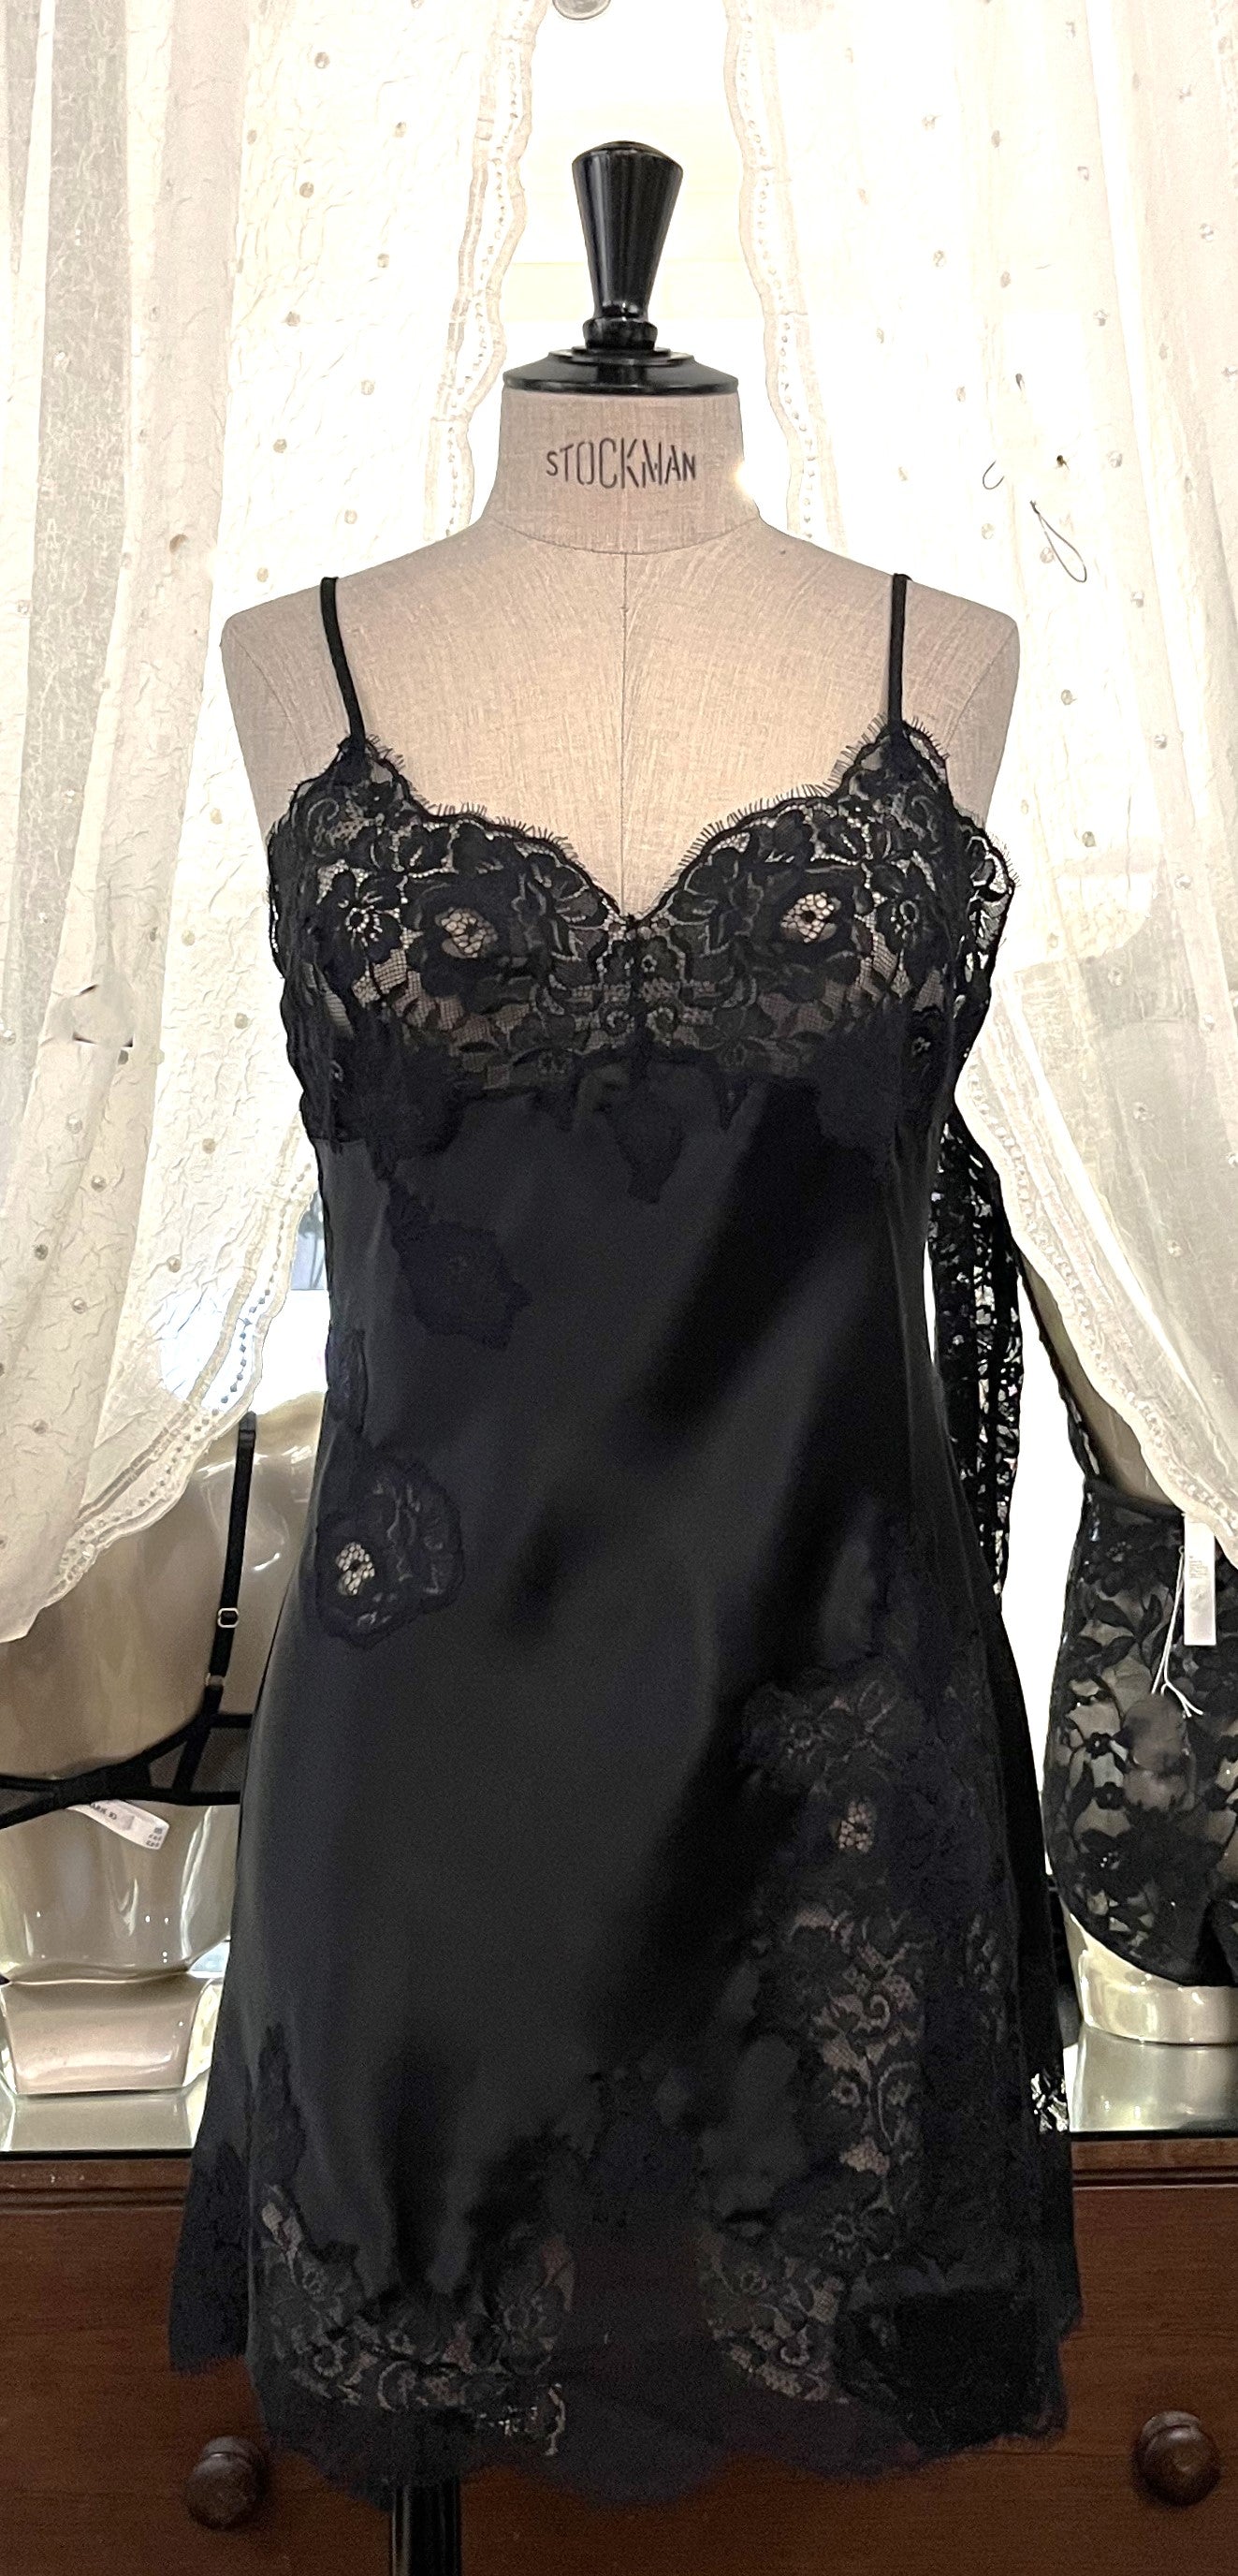 Made in Florence, Italy, this is a beautiful short pure silk satin night/slip. There is stunning deep appliqué lace on the bust and front of the garment. A side split leads to the hem, all with the same rich lace detail. There are French seams throughout for softness. The fine spaghetti straps are adjustable for the perfect fit. This nightslip is cut on the bias and panelled, giving lovely flare and movement. Perfect for bed or daywear. May be worn as underwear, nightwear or outerwear. Black/Black.